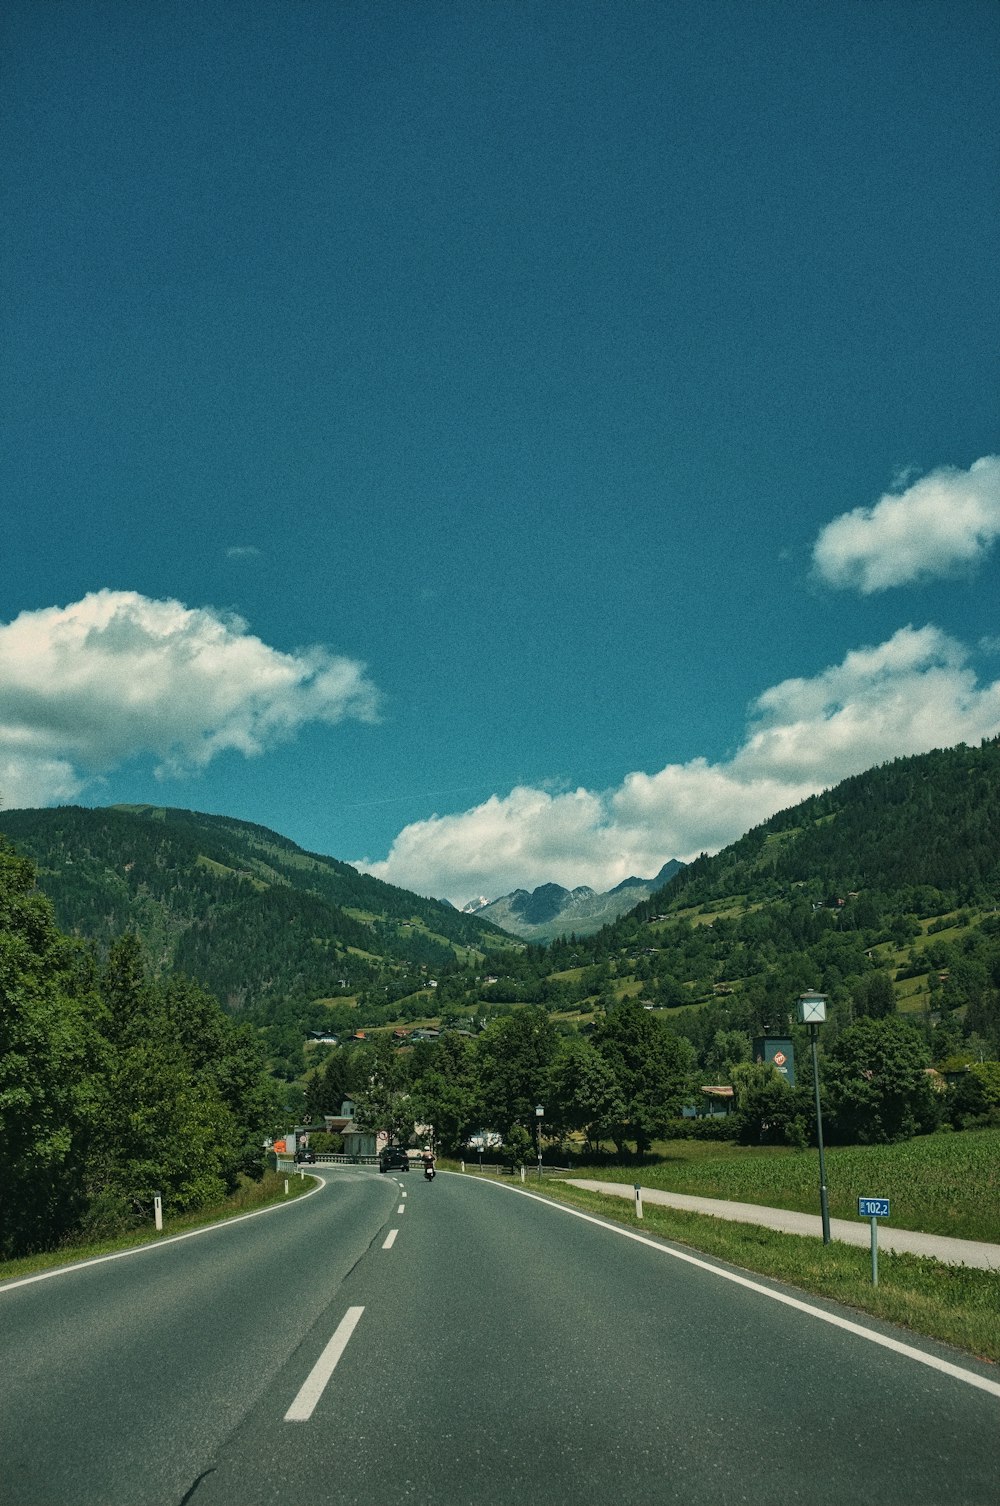 a view of a road with mountains in the background